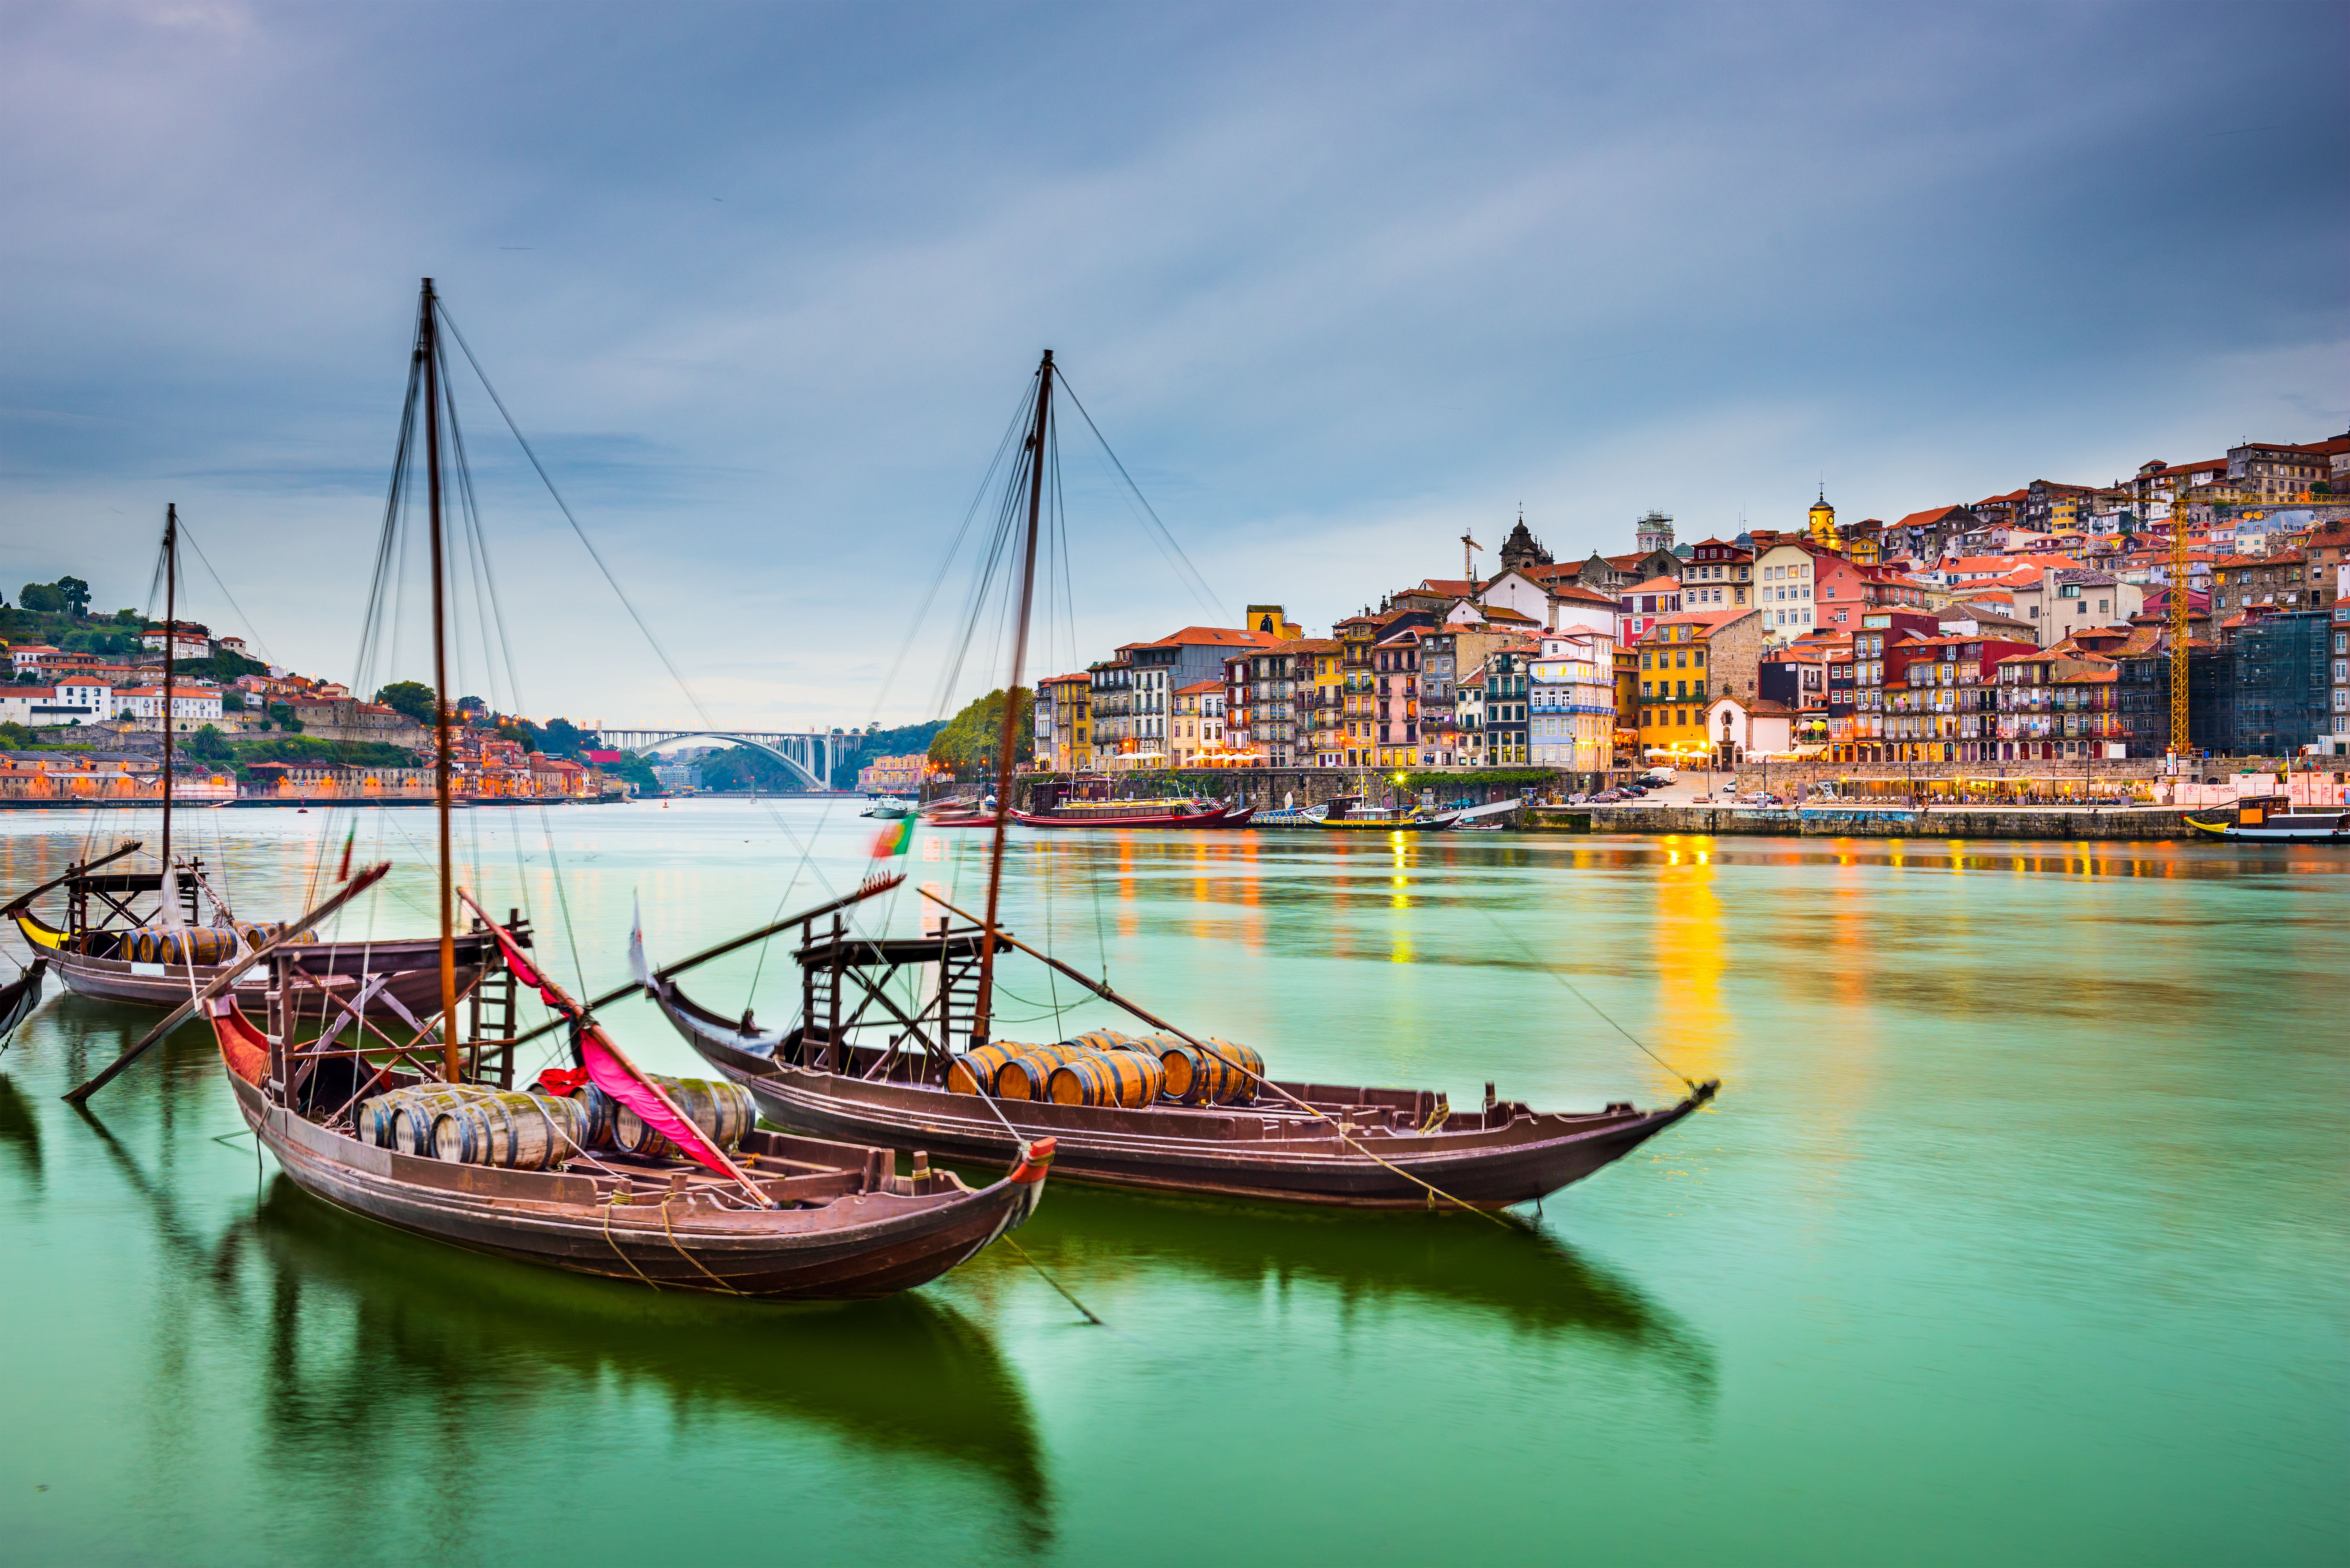 Boats on the water in Porto, Portugal